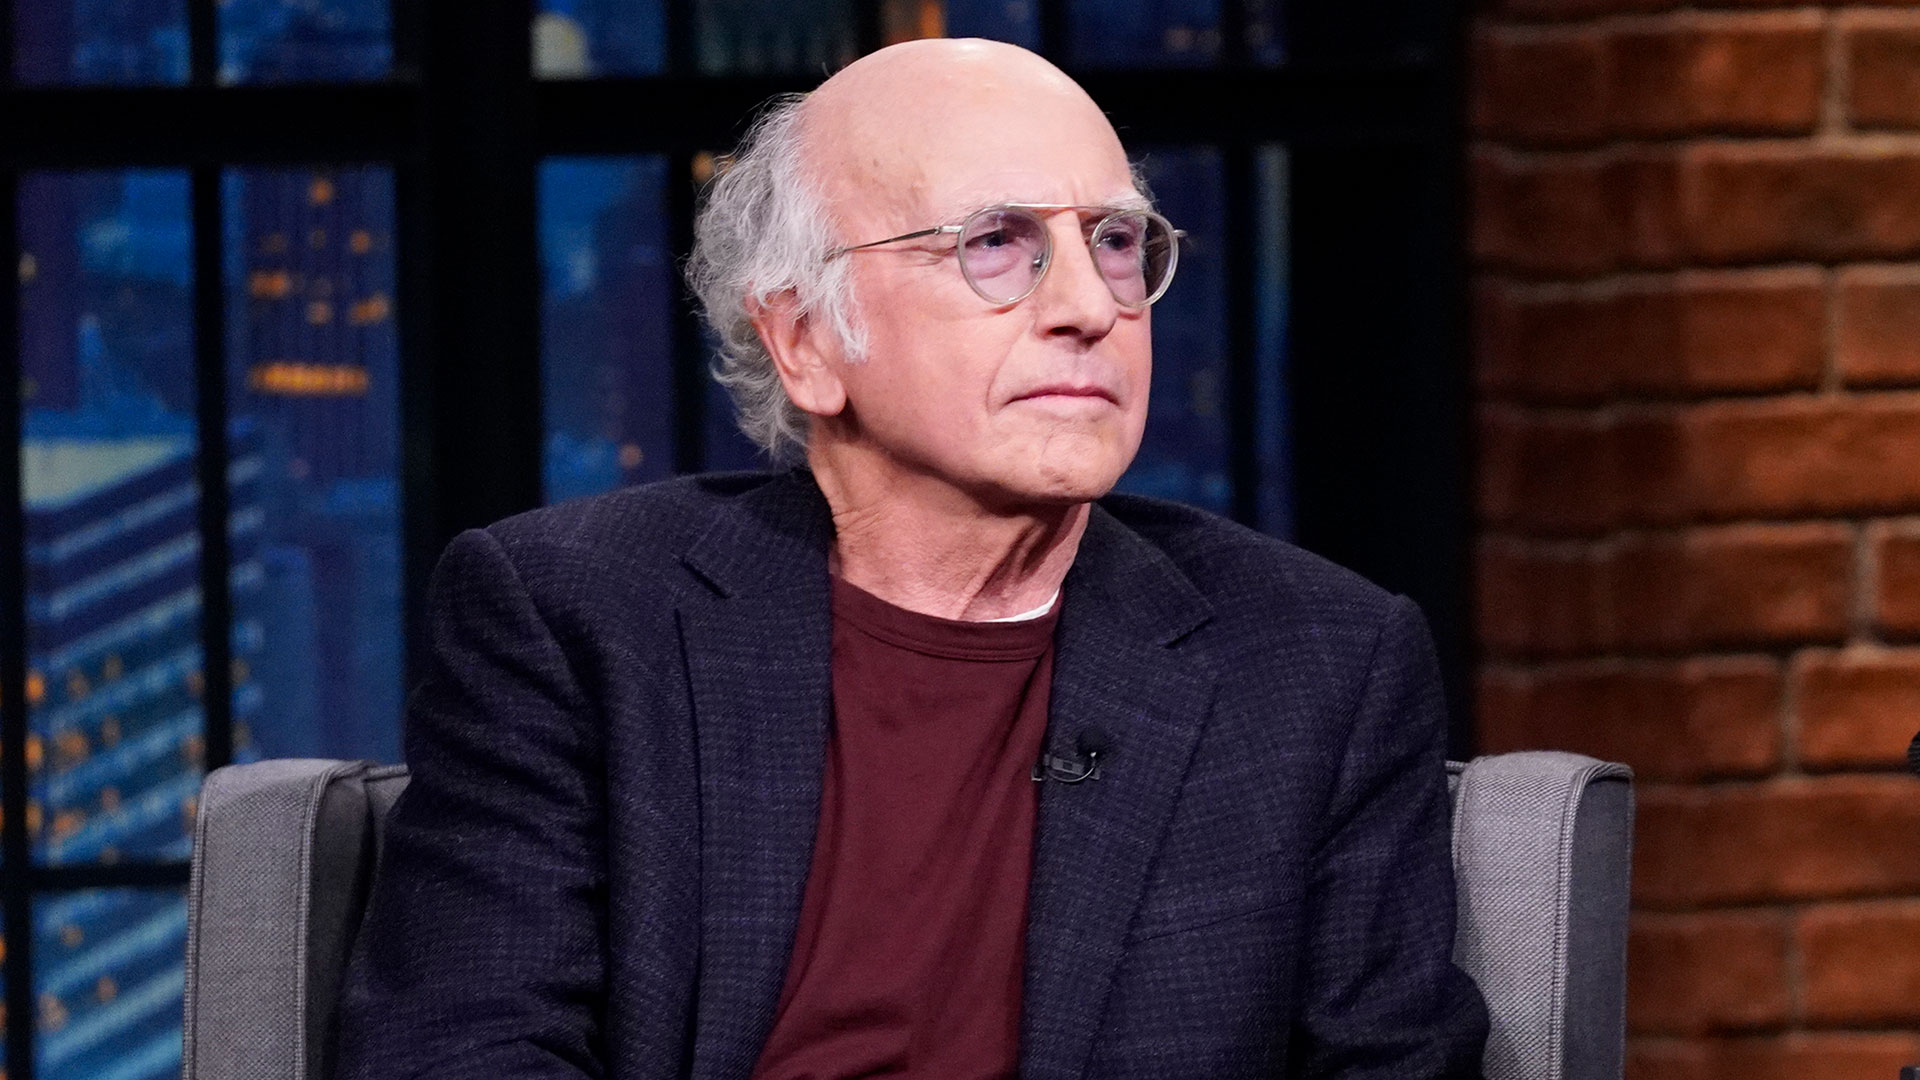 Watch Larry David (Season 7, Episode 48) of Late Night with Seth Meyers or ...